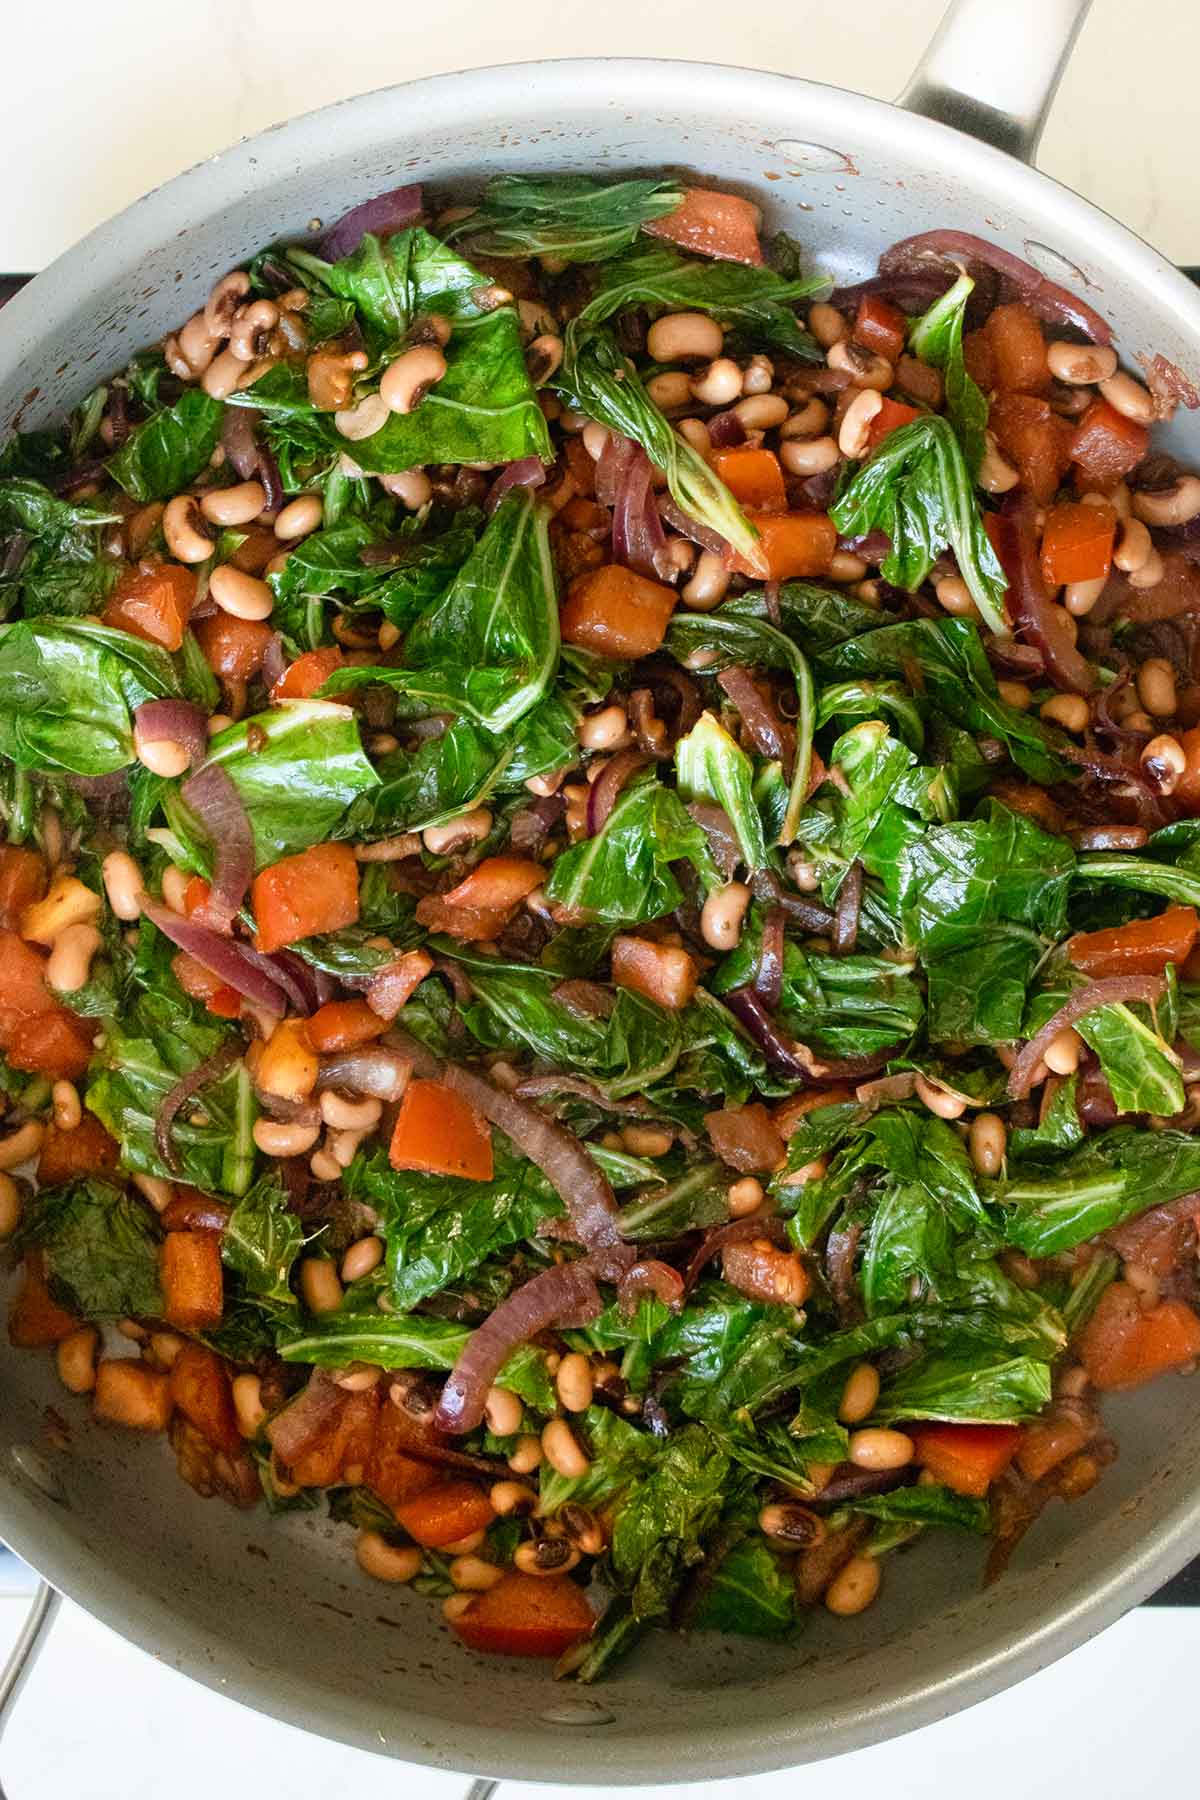 vegan black eyed peas and collards in the pan after cooking